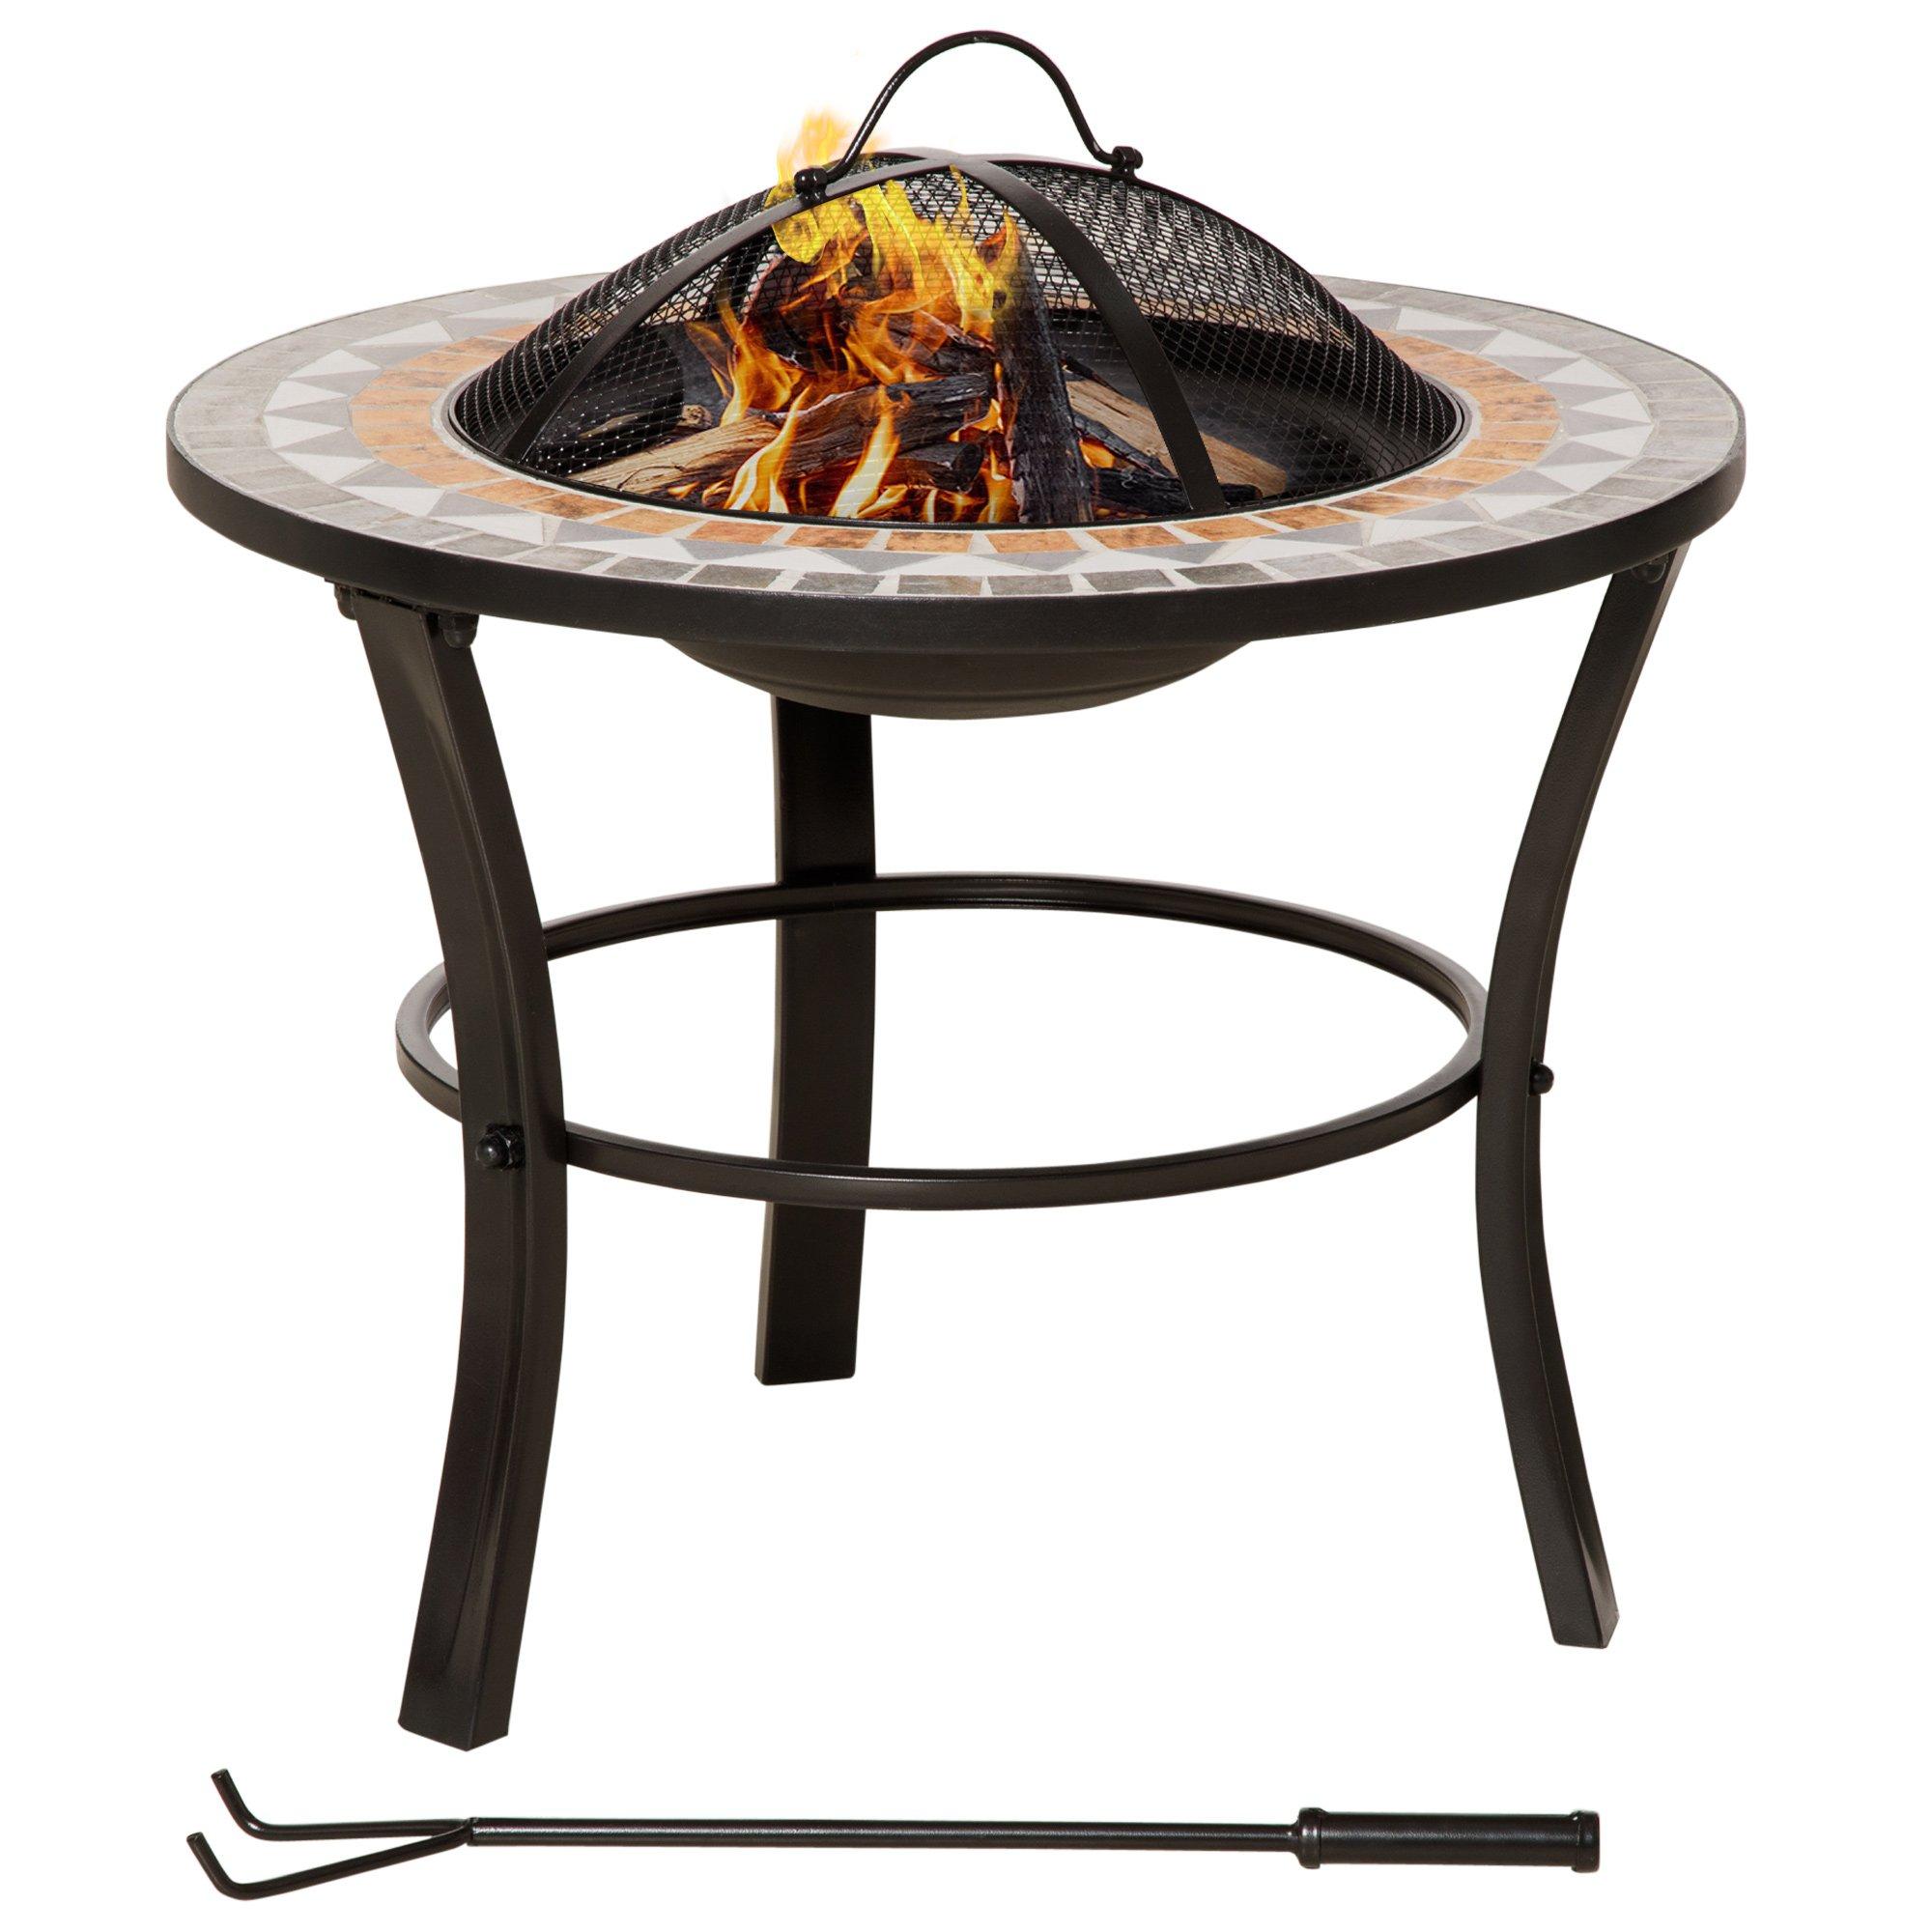 60cm Round Firepit with Mosaic Outer, Mesh Screen Lid and Poker